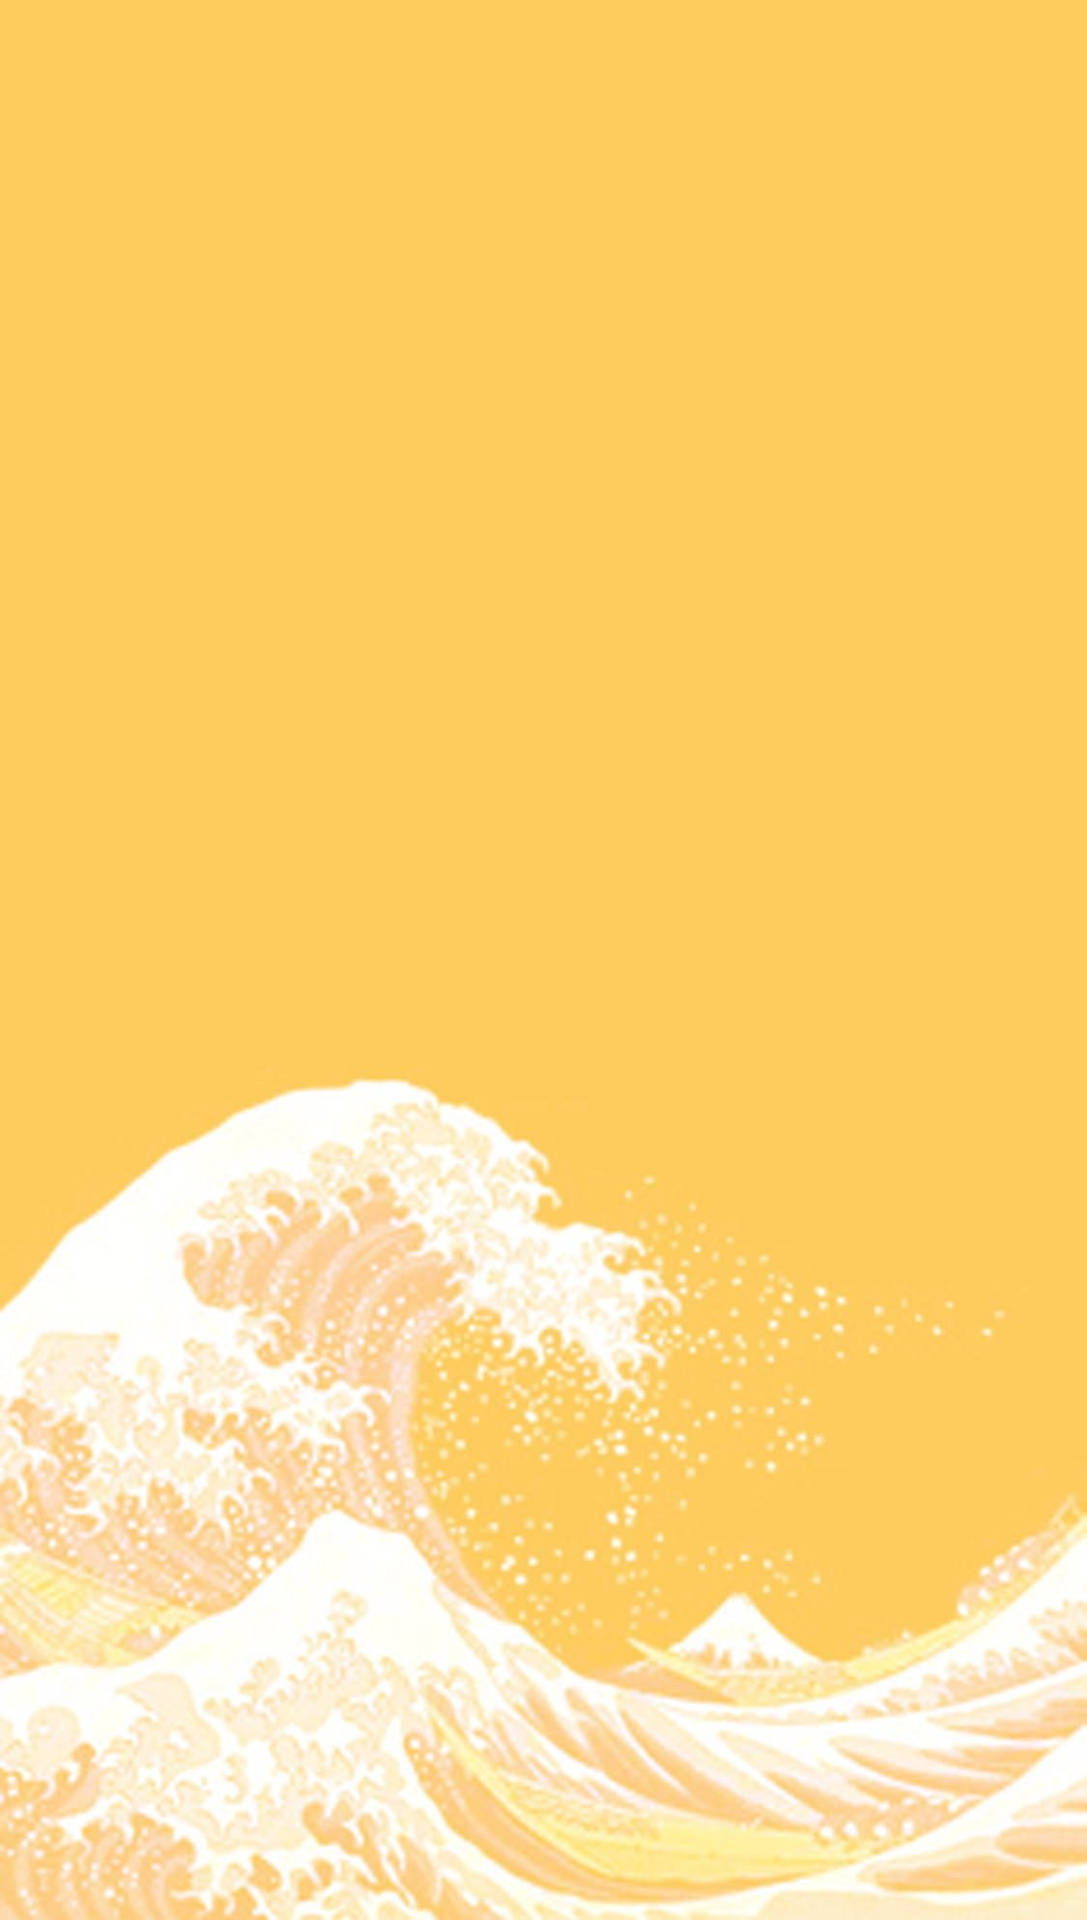 Aesthetic phone background of a wave - Light yellow